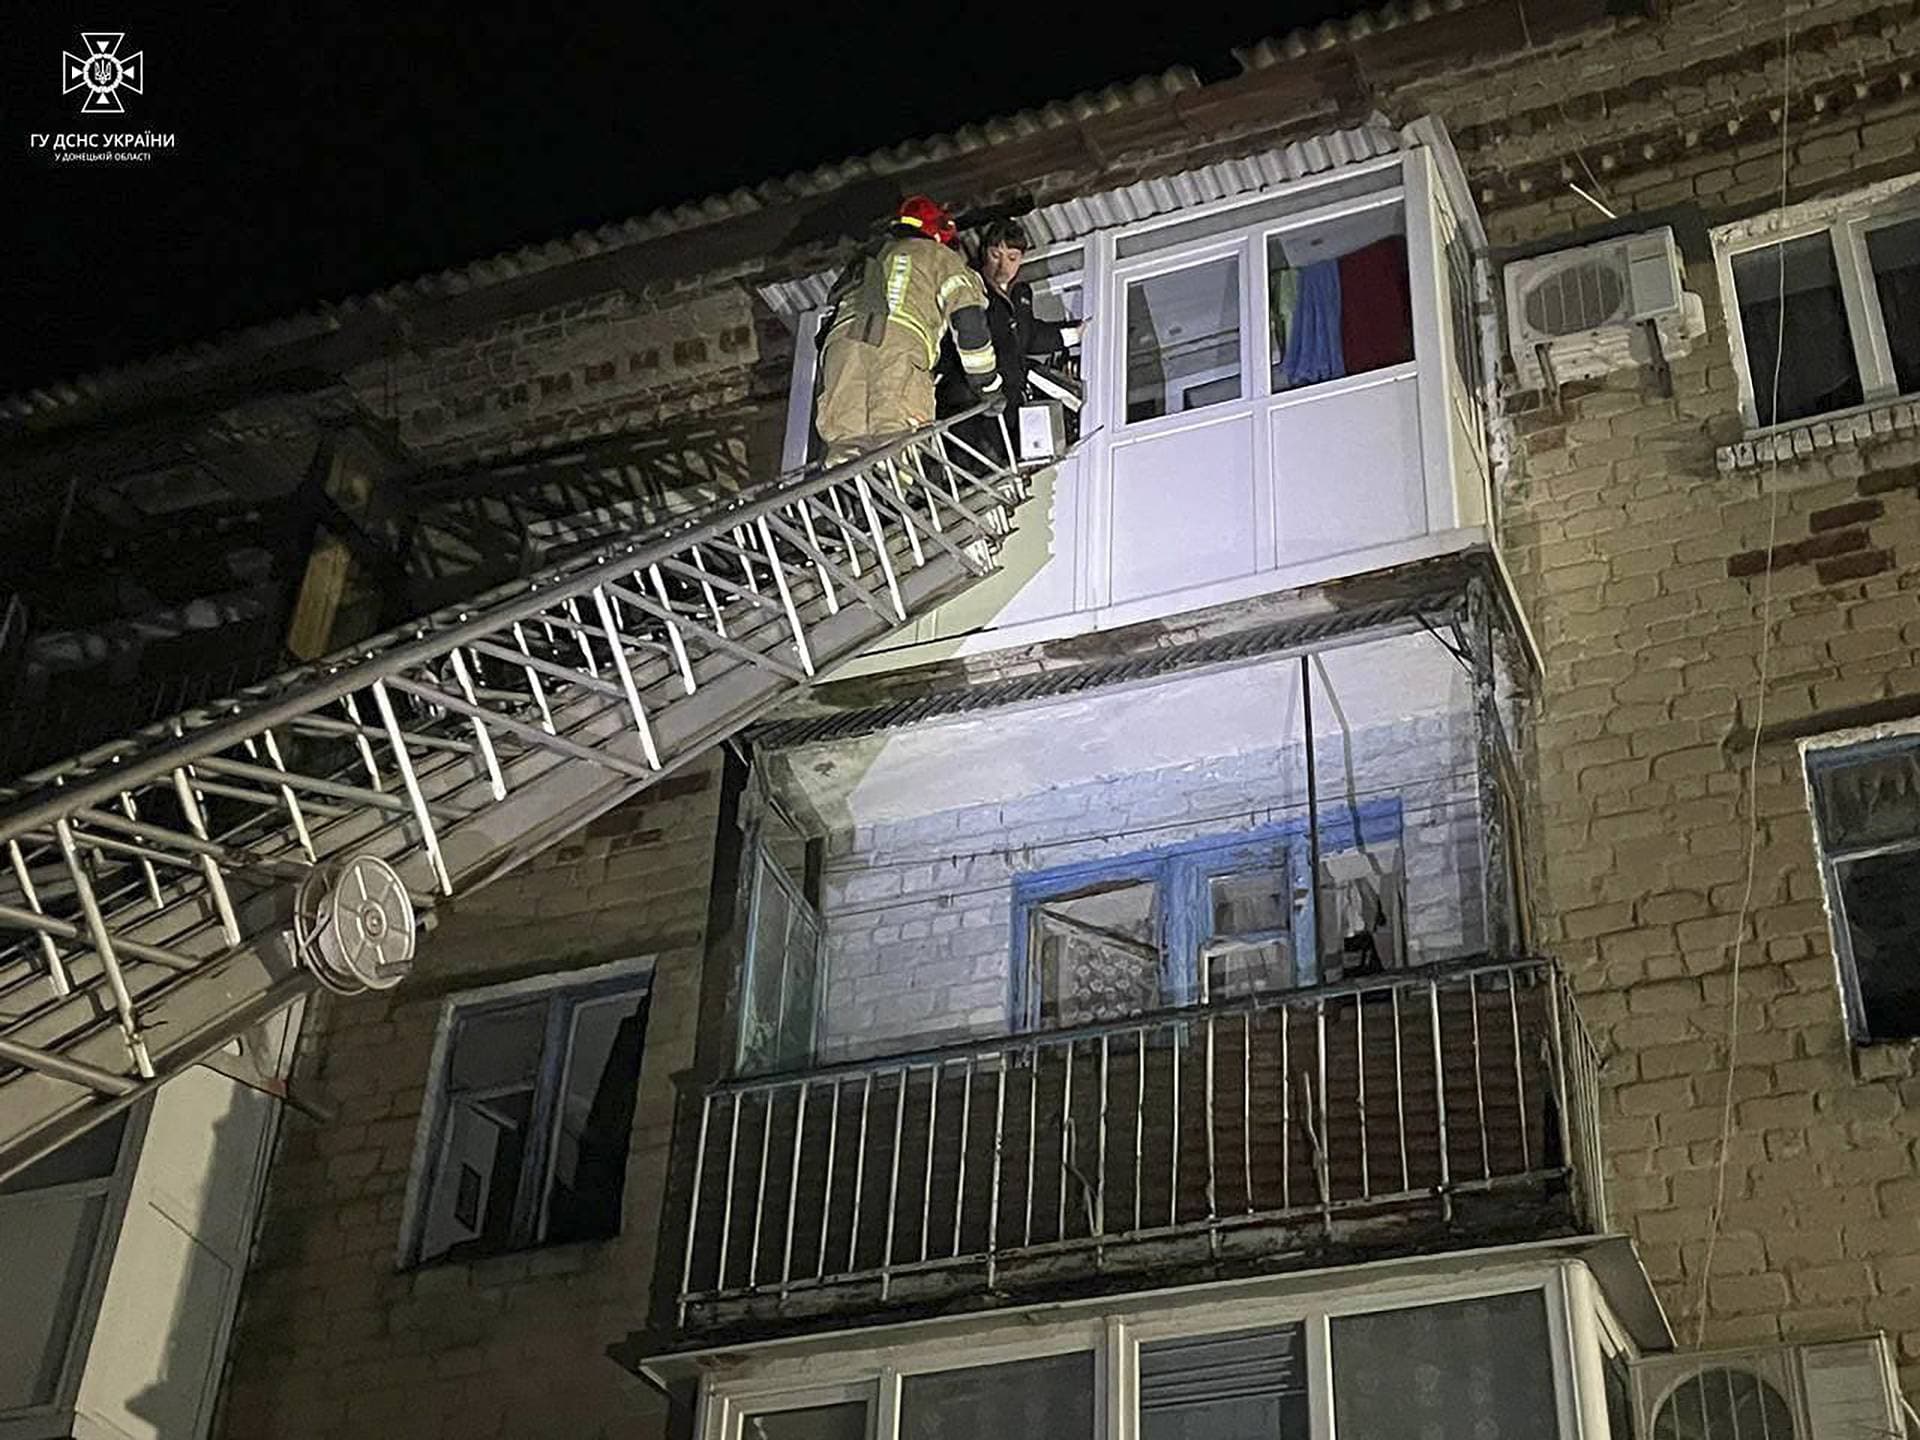 A rescuer evacuates a civilian from an apartment building damaged at night by Russian missile strike in Selydove